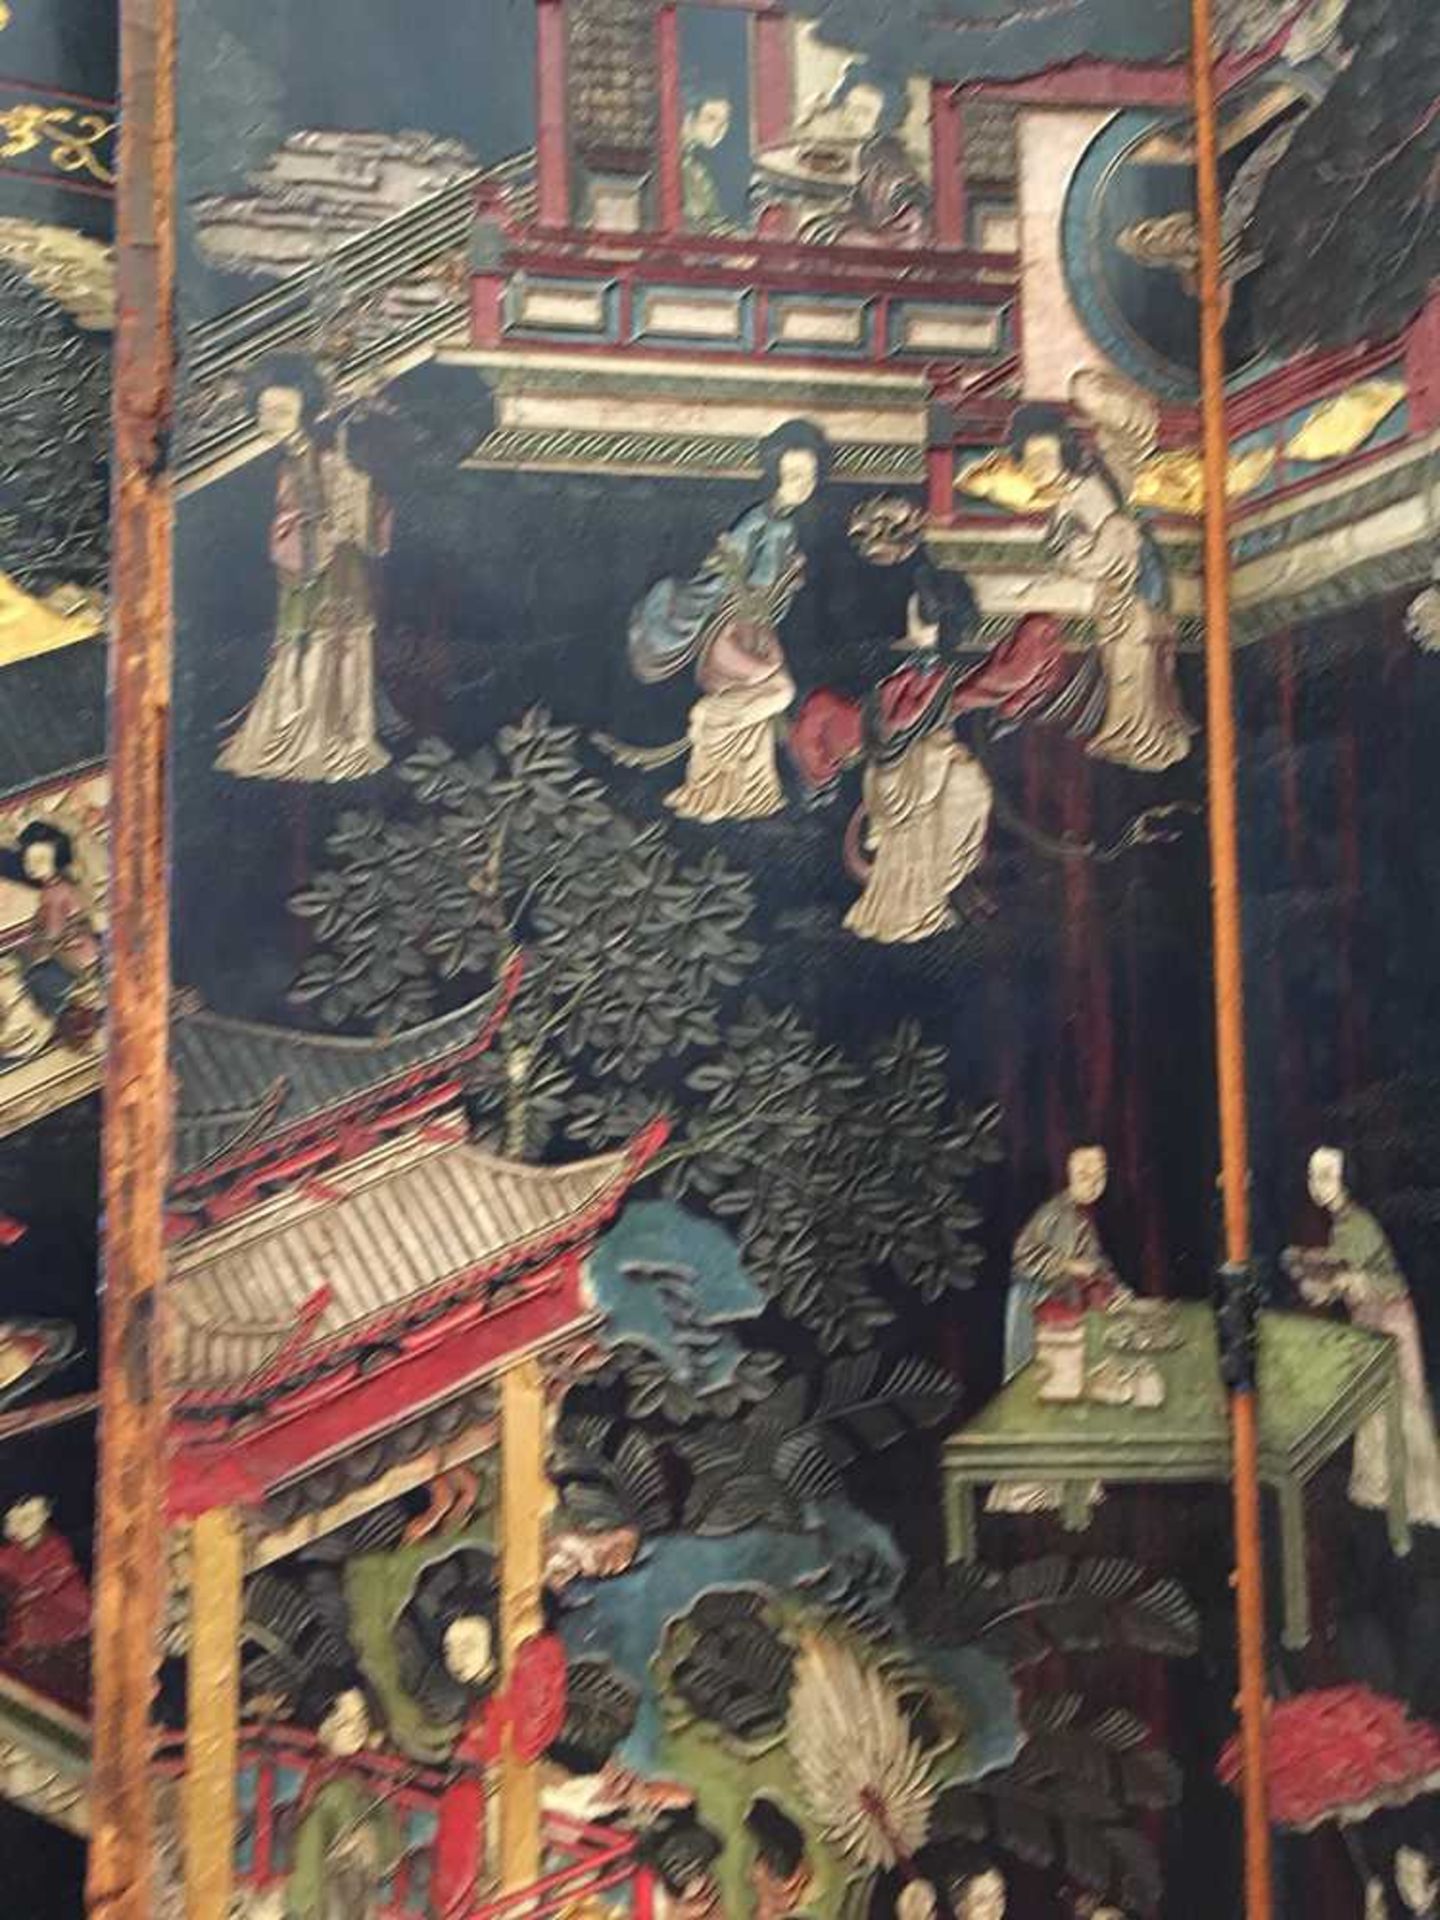 A CHINESE COROMANDEL BLACK LACQUER TWELVE-PANEL SCREEN QING DYNASTY, 18TH CENTURY - Image 24 of 72